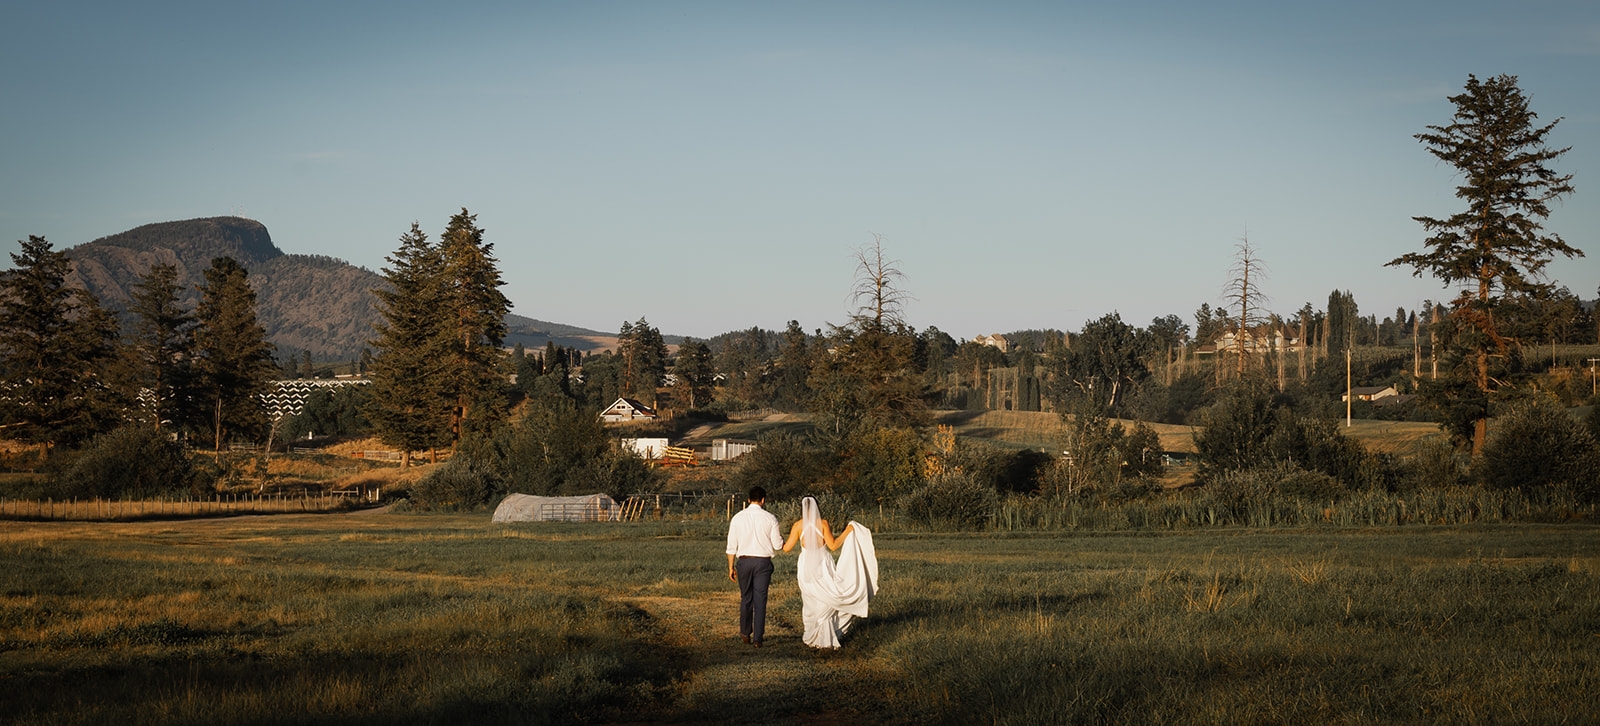 wedding couple walking away from camera in a large open field